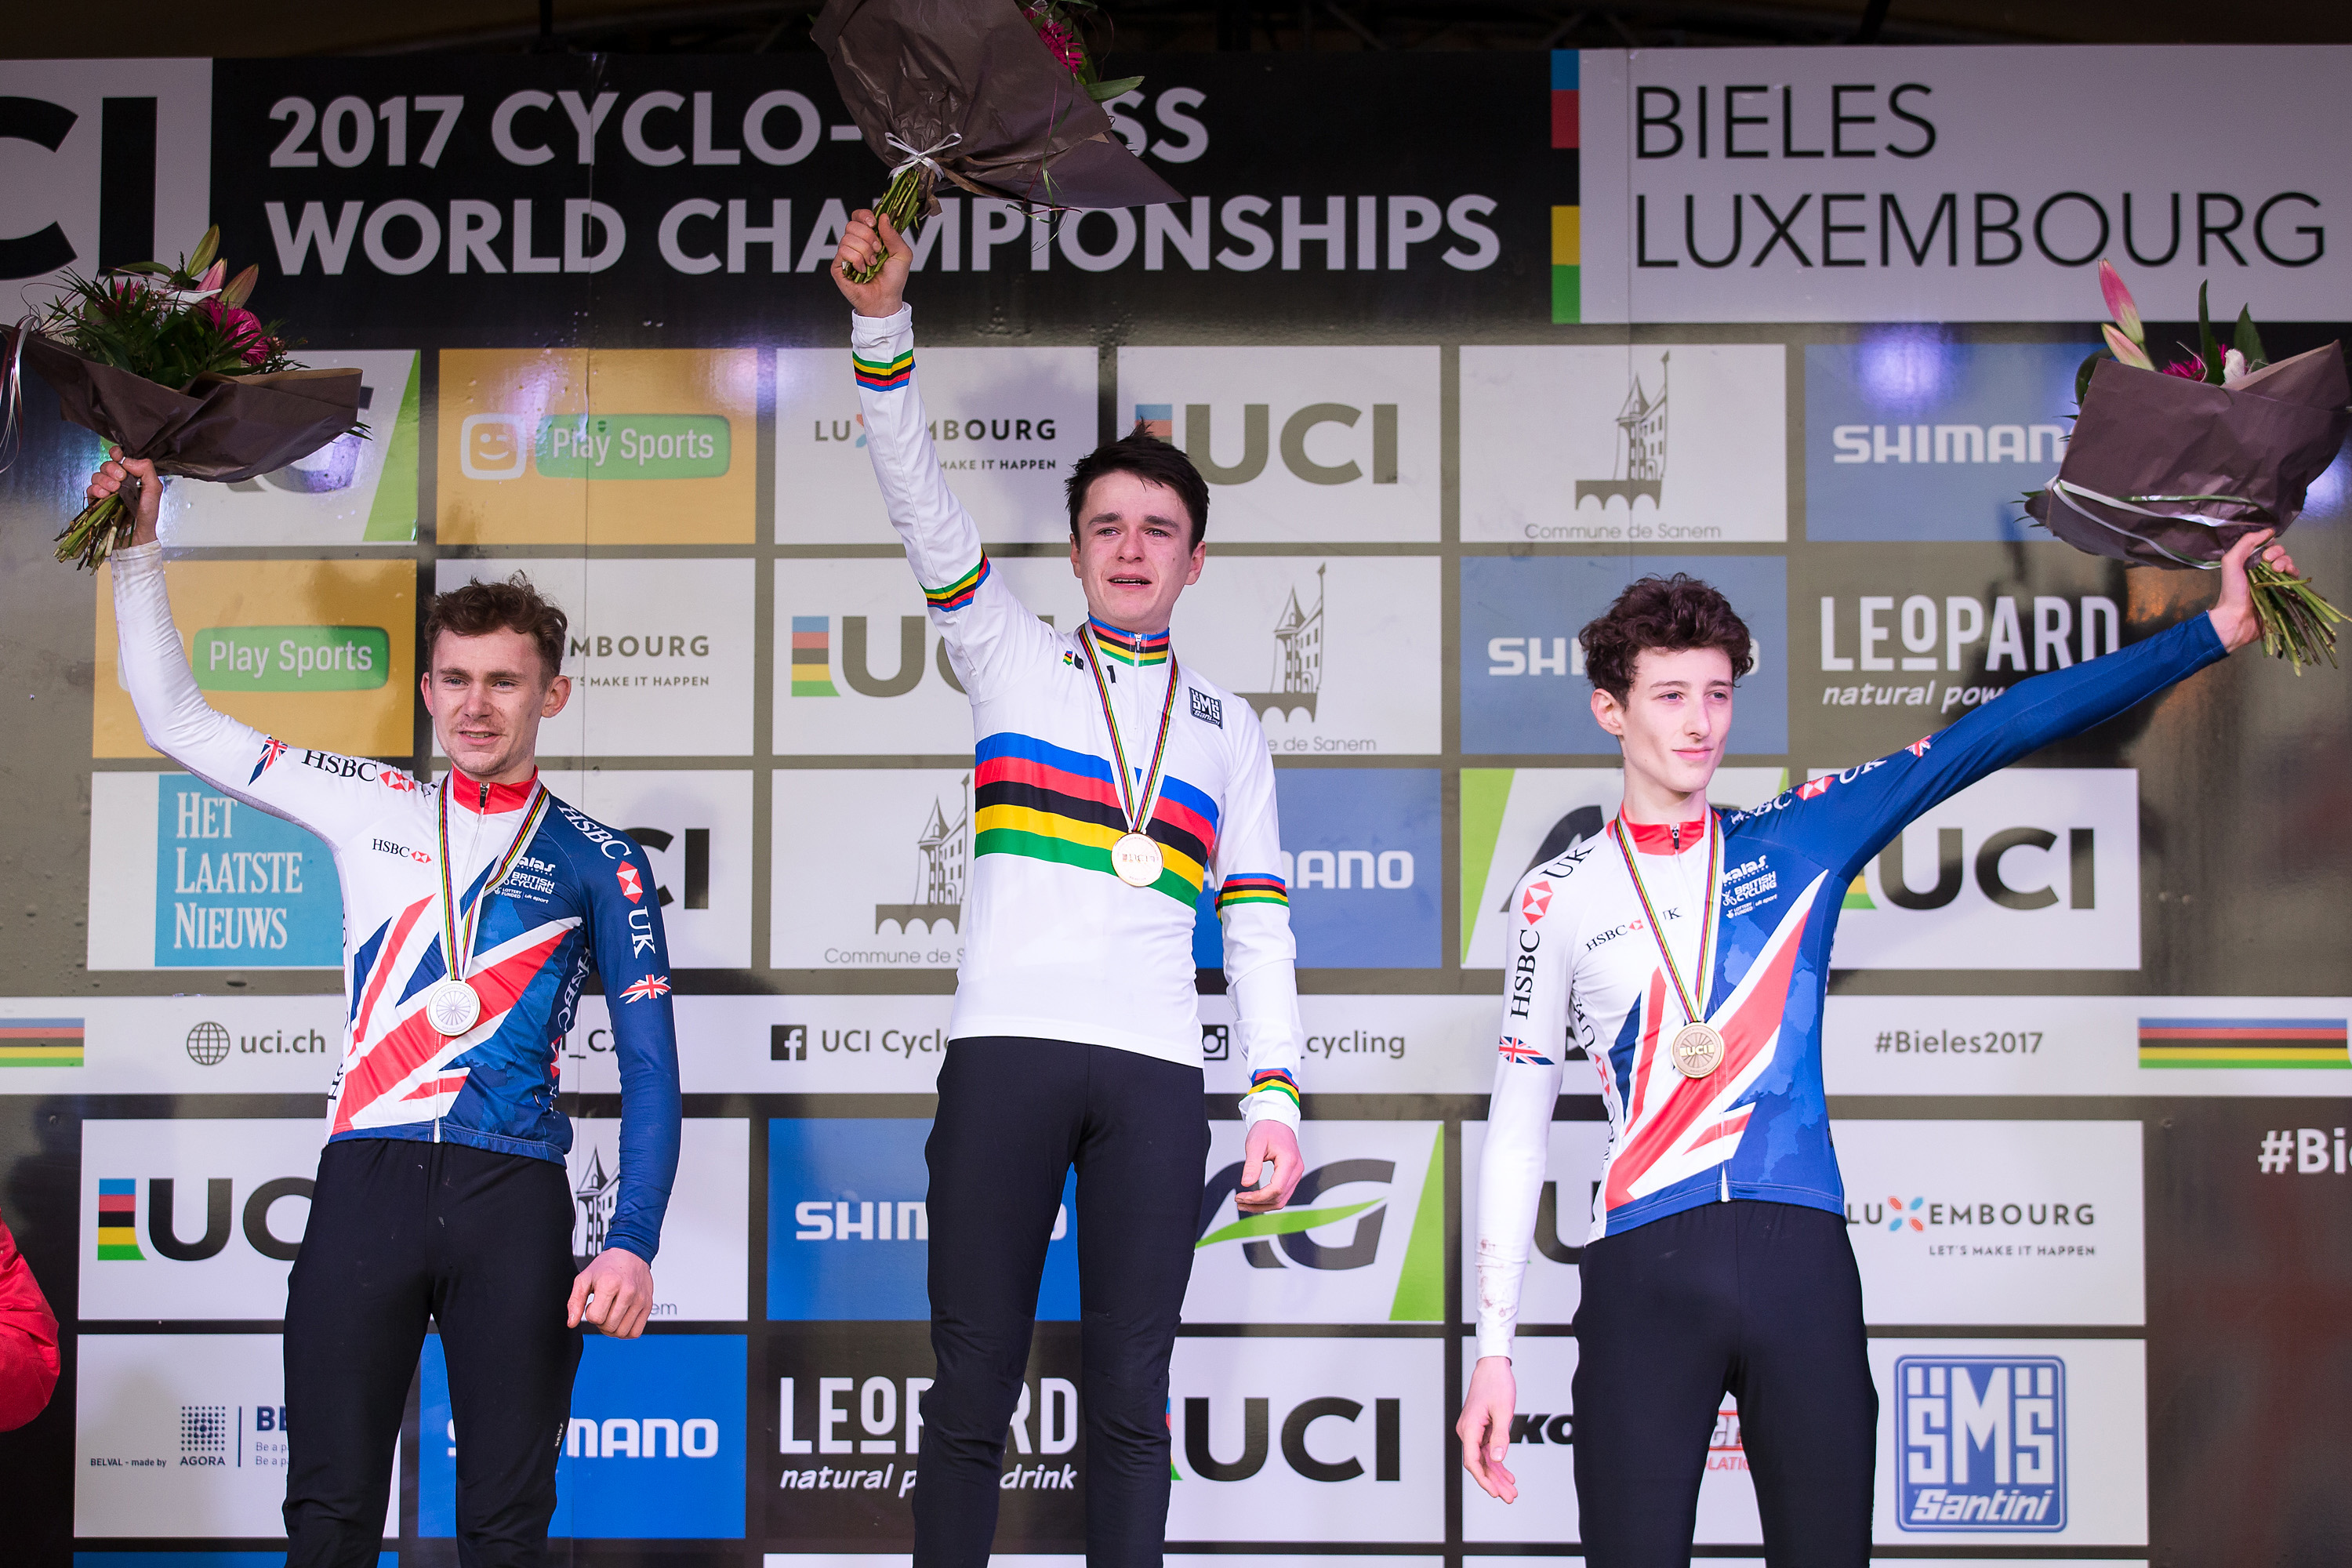 Tom Pidcock, Dan Tulett and Ben Turner made history at the 2017 UCI Cyclo-cross World Championships by securing a British one-two-three